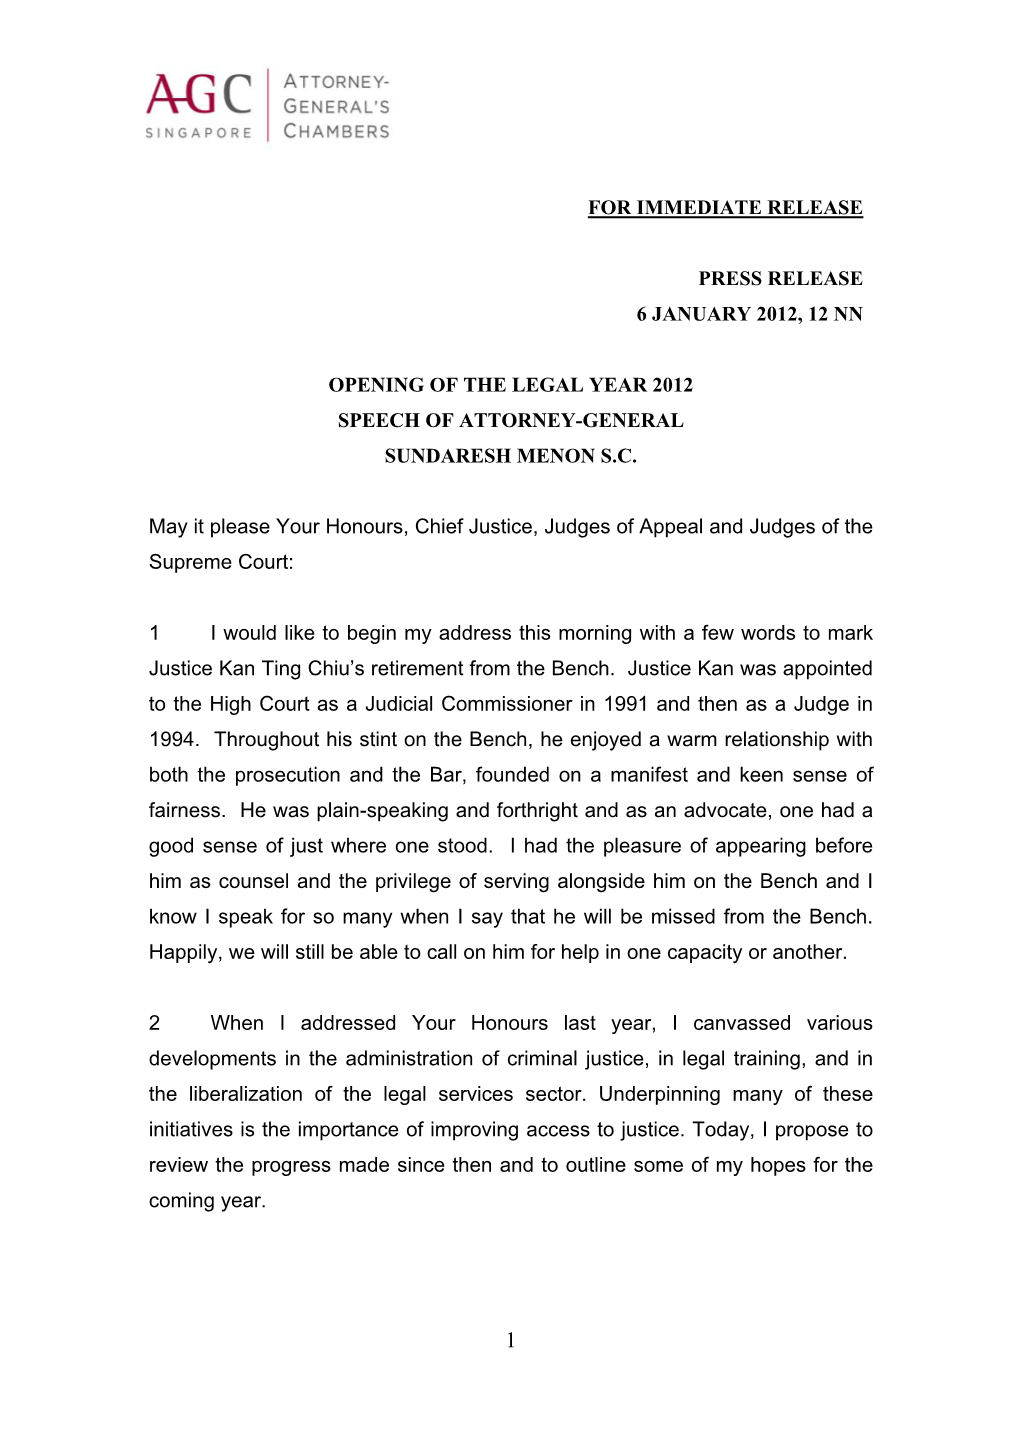 For Immediate Release Press Release 6 January 2012, 12 Nn Opening of the Legal Year 2012 Speech of Attorney-General Sundaresh